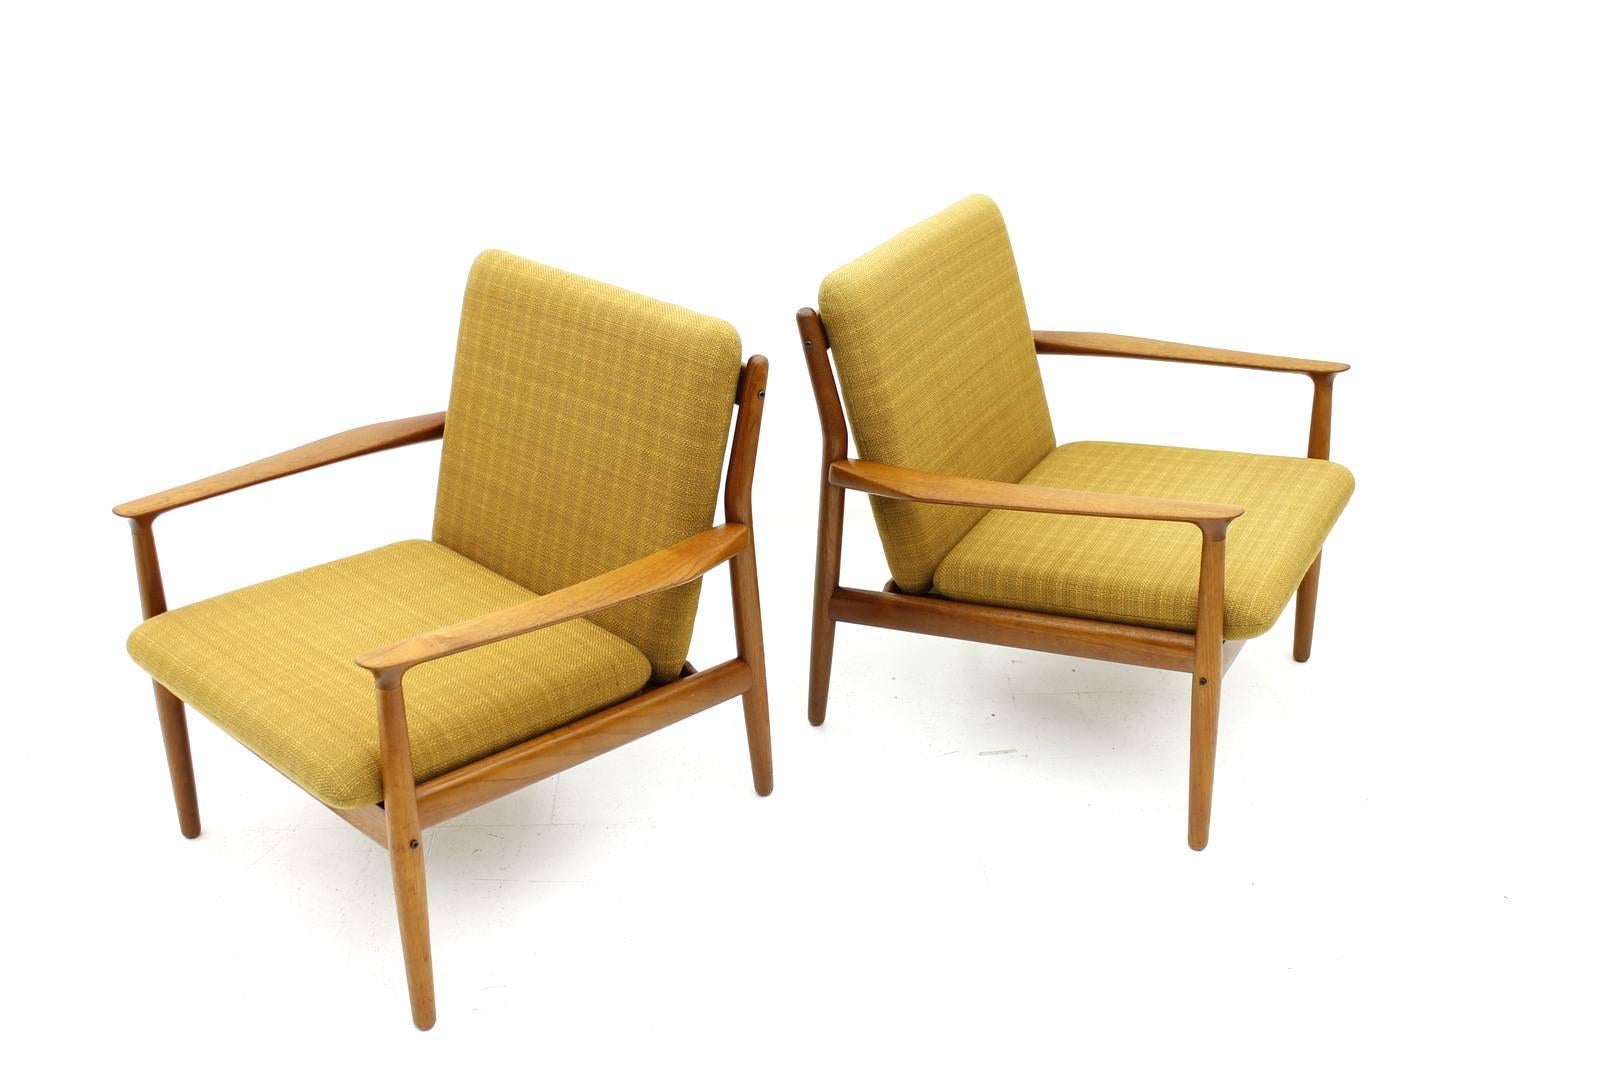 Pair Danish Teak Lounge Chairs by Grete Jalk, 1960`s.
Teakwood, original Cushions.

Excellent Condition.

Worldwide shipping.

